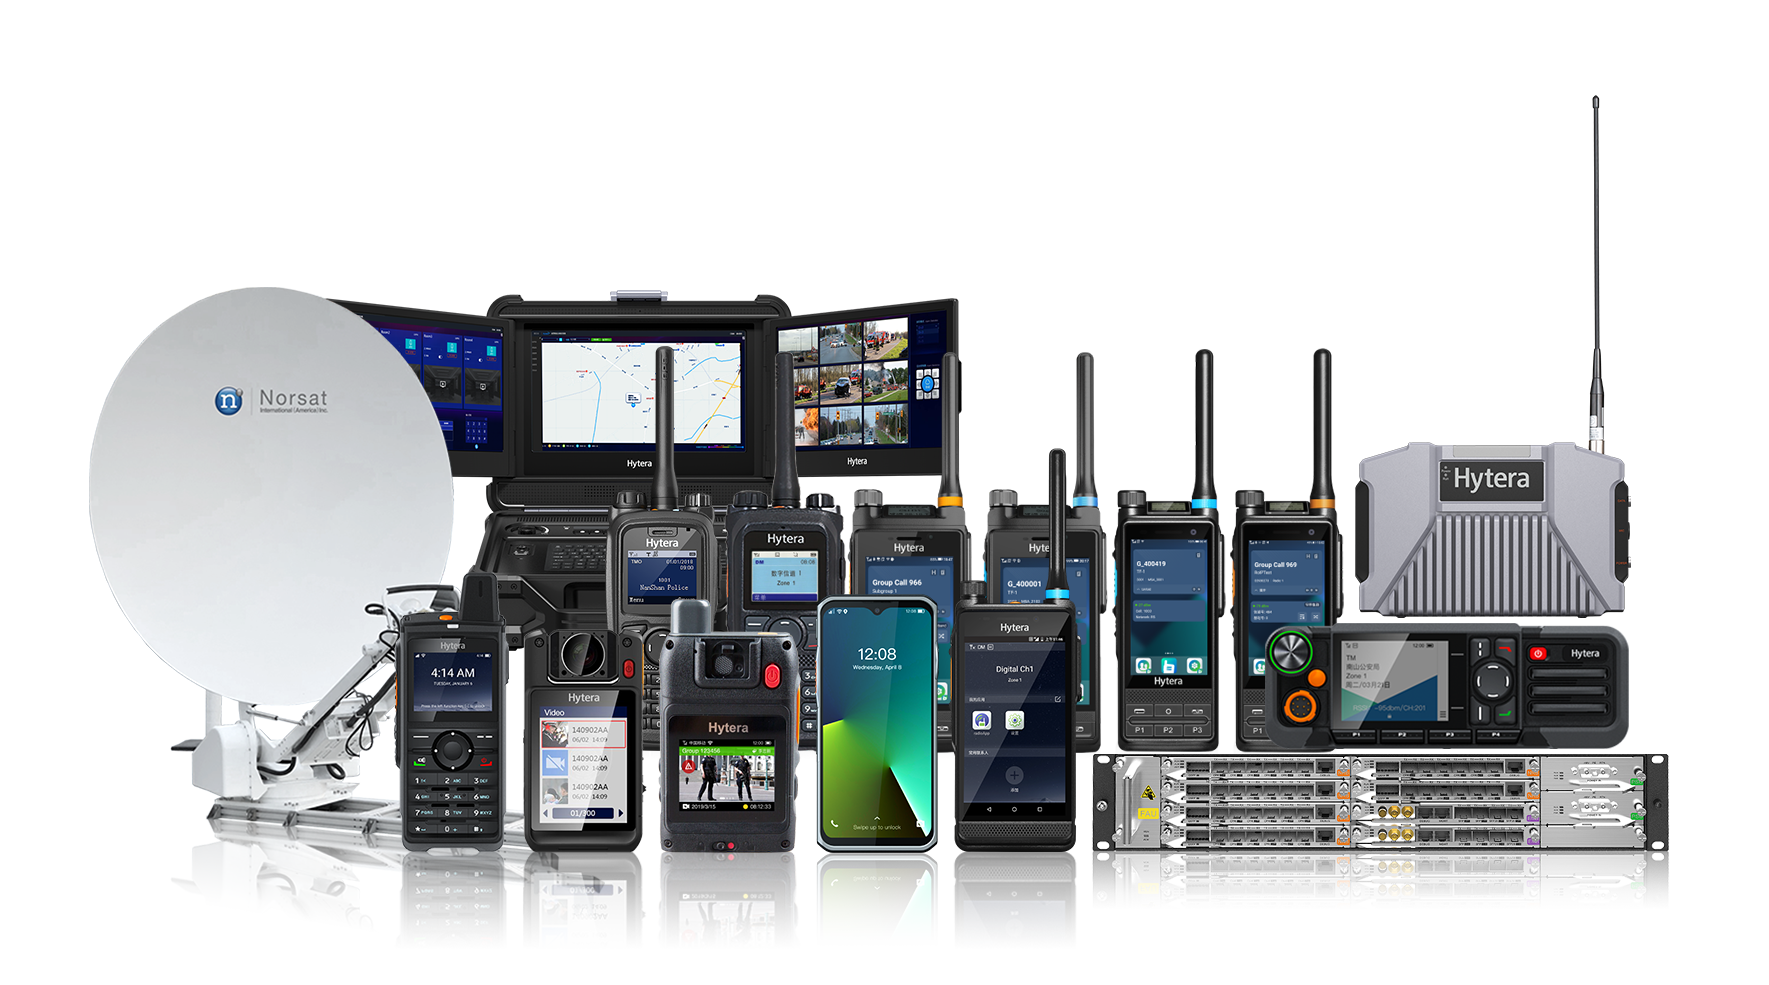 Hytera: Evolving to Next-Gen Mission Critical Communications